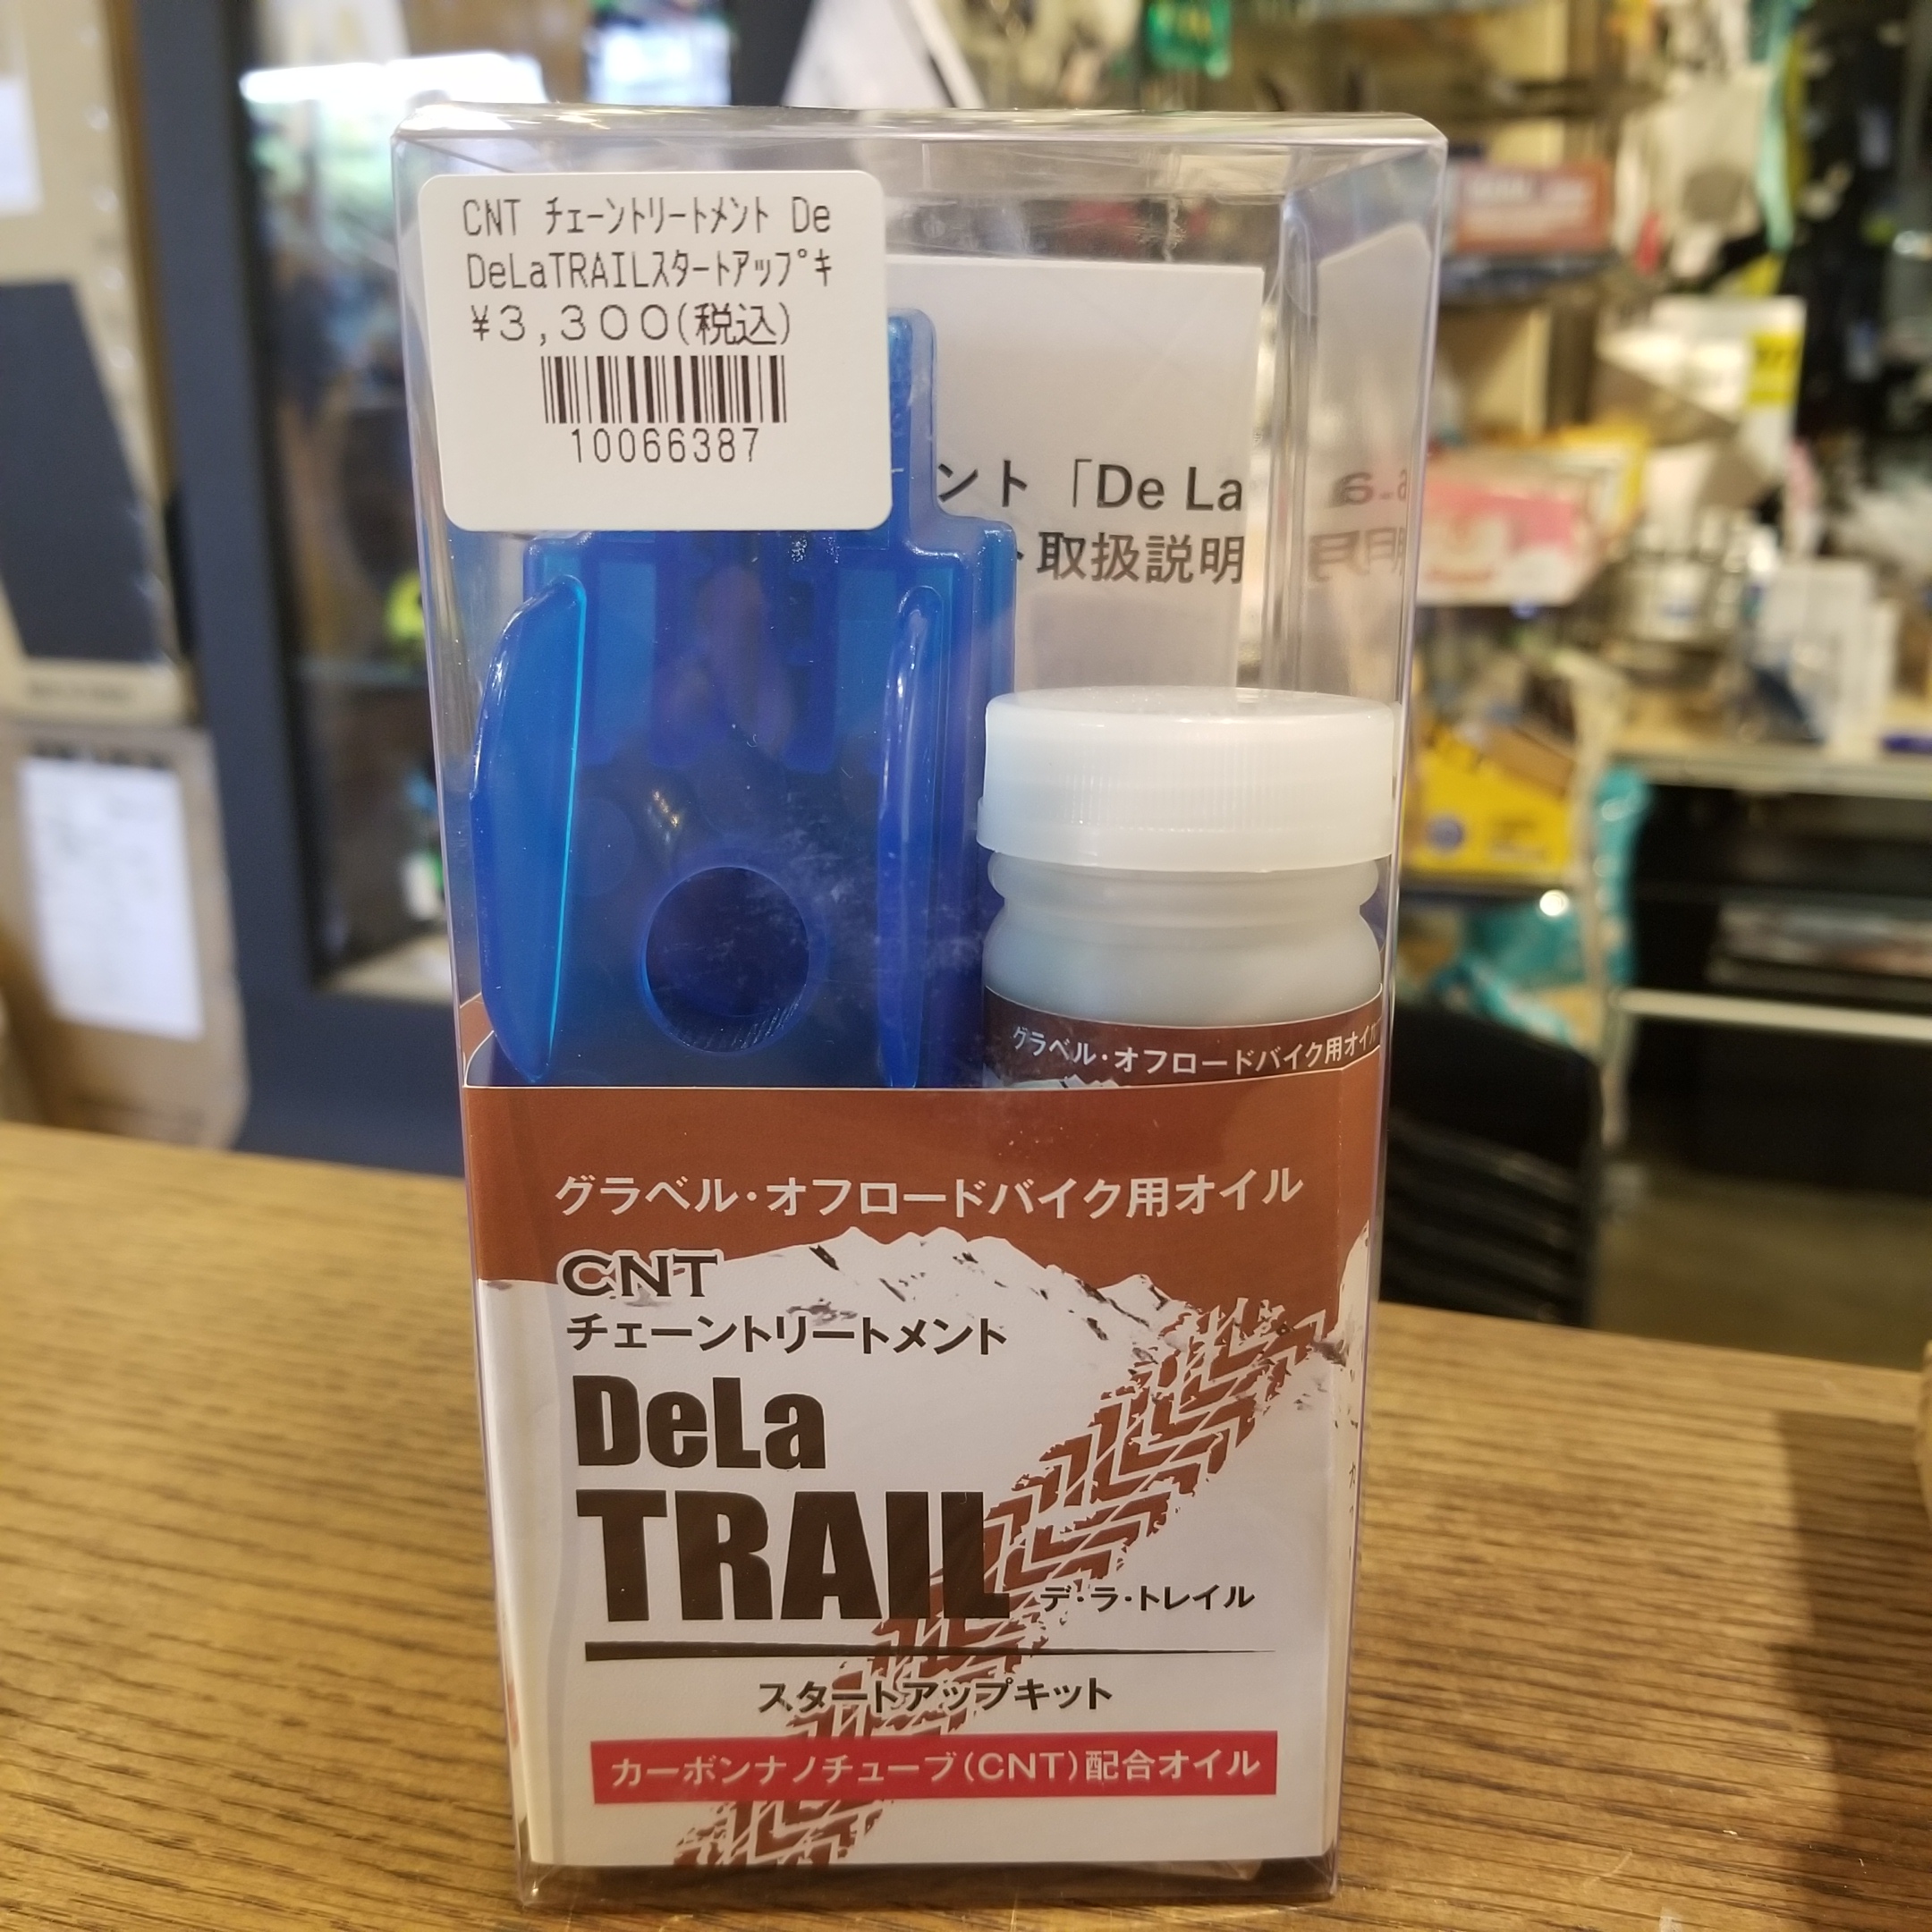 RideOasis CNT チェーントリートメント「DeLa TRAIL」スタートアップキット 送料無料 一部地域は除く